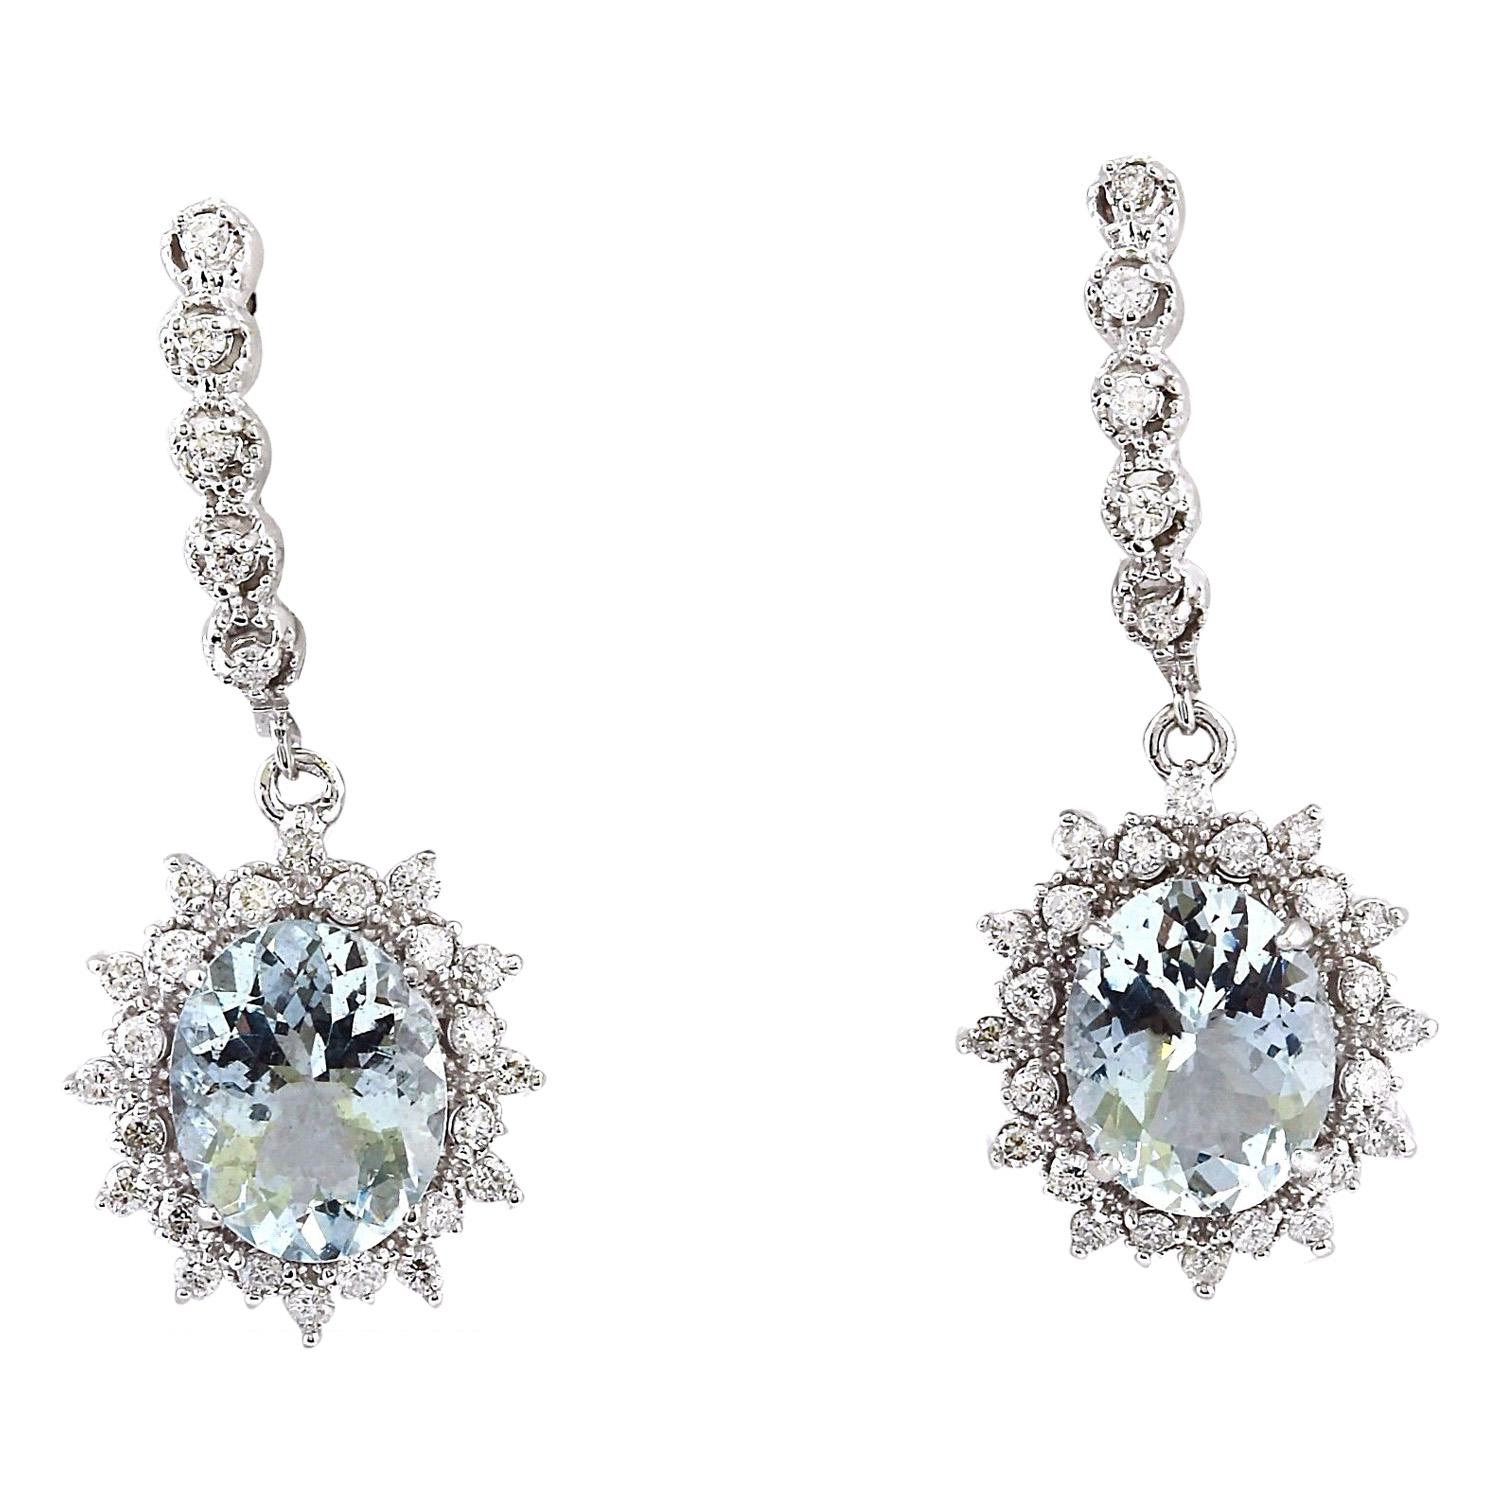 7.30 Carat Natural Aquamarine 14K Solid White Gold Diamond Earrings
 Item Type: Earrings
 Item Style: Drop
 Item Length: 1.4 in
 Material: 14K White Gold
 Mainstone: Aquamarine
 Stone Color: Blue
 Stone Weight: 5.80 Carat
 Stone Shape: Oval
 Stone